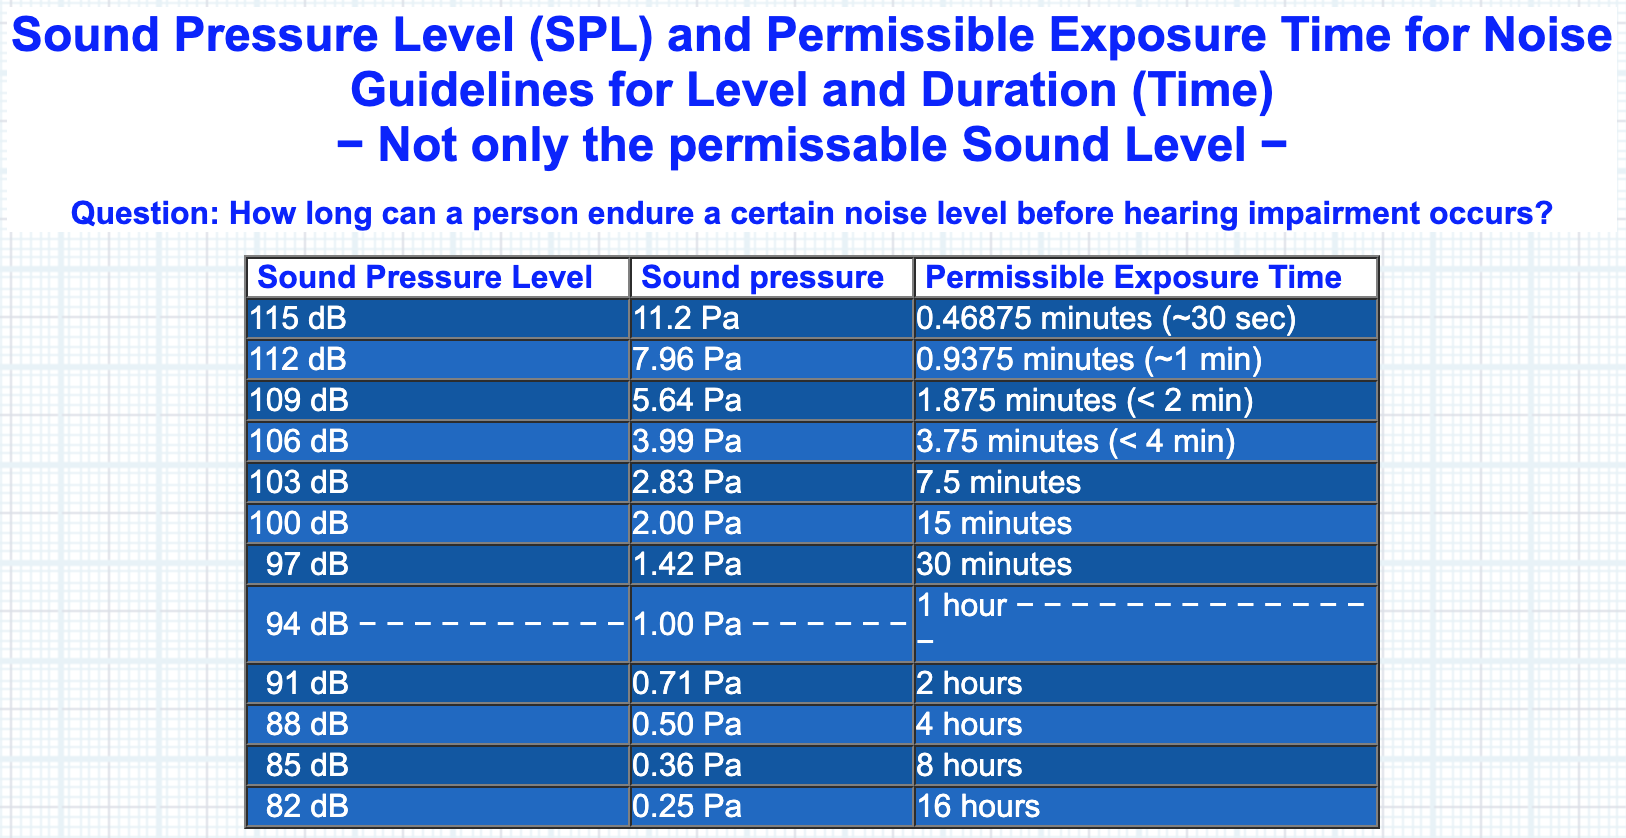 exposure times are various SPLs